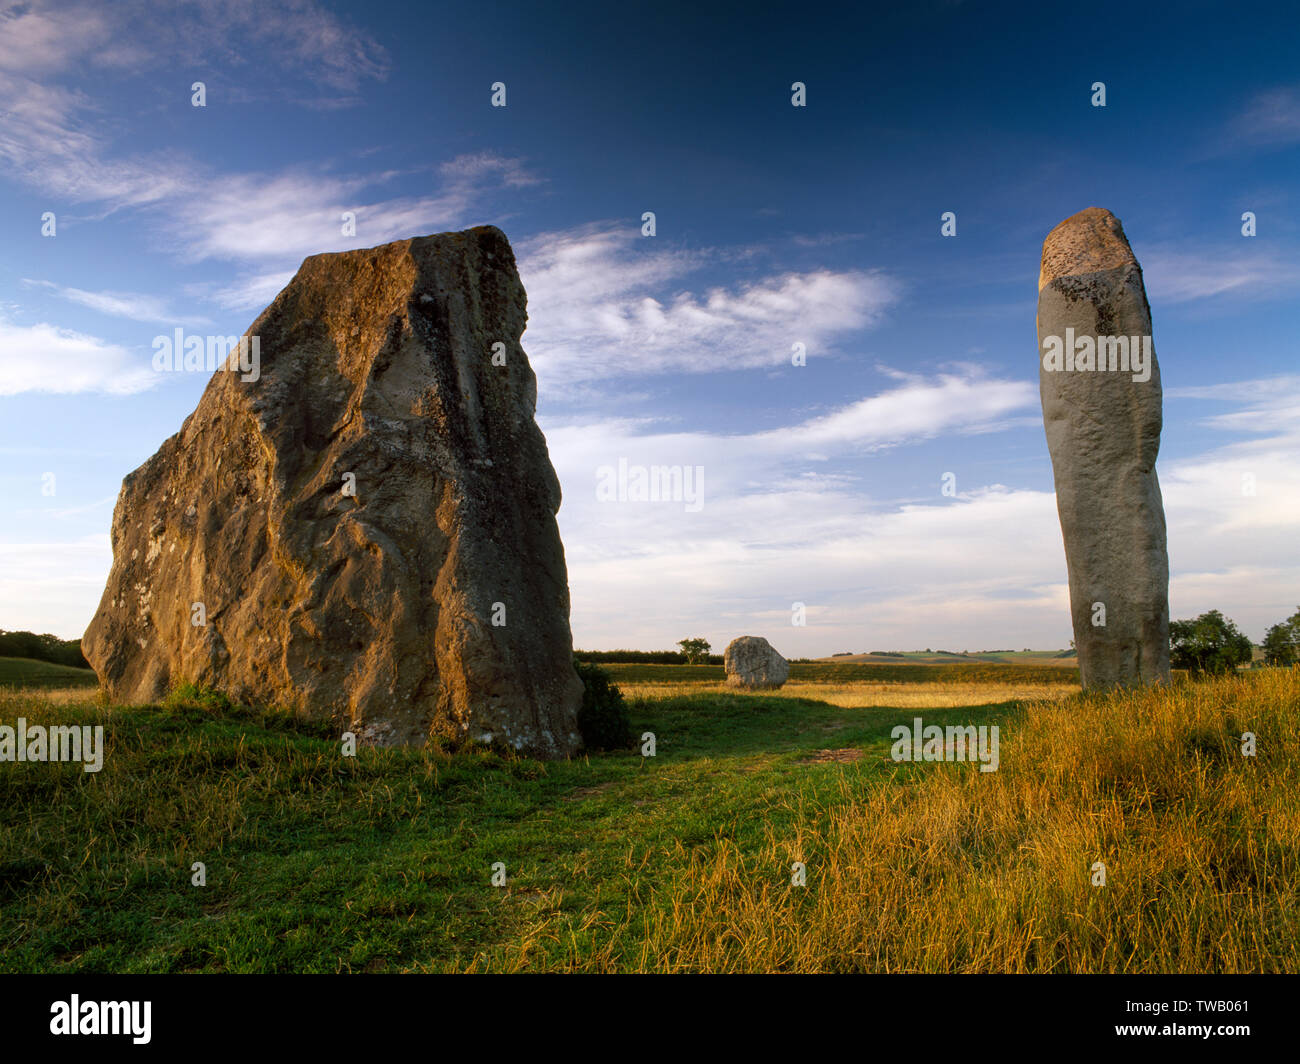 The Cove, Avebury, Wiltshire, England. Neolithic ritual site surrounded by a stone circle contained by the ditch and bank of a massive henge monument. Stock Photo